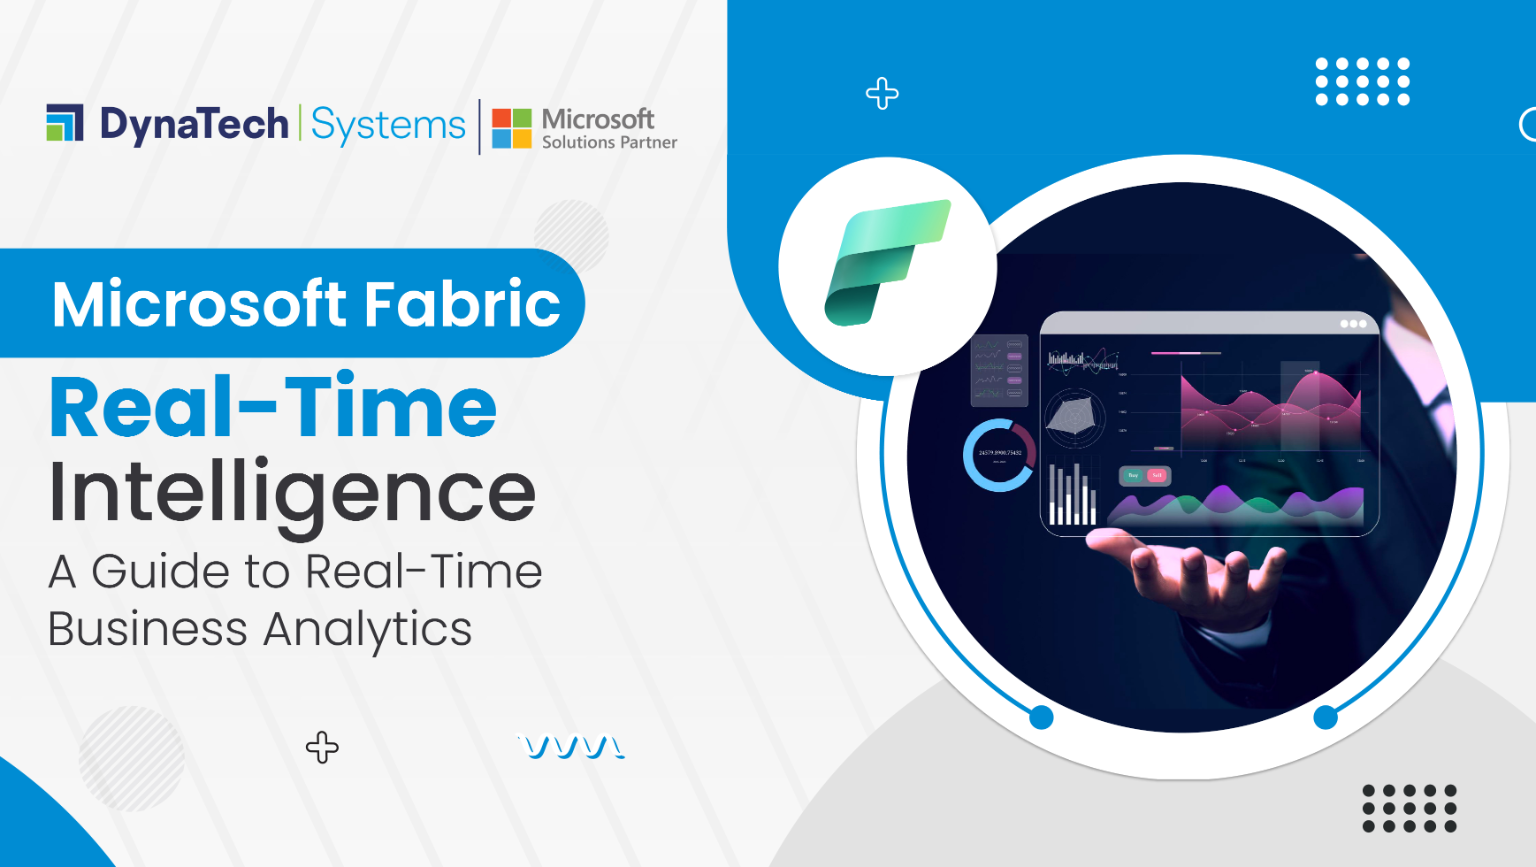 Microsoft Fabric Real-Time Intelligence: A Guide to Real-Time Business Analytics